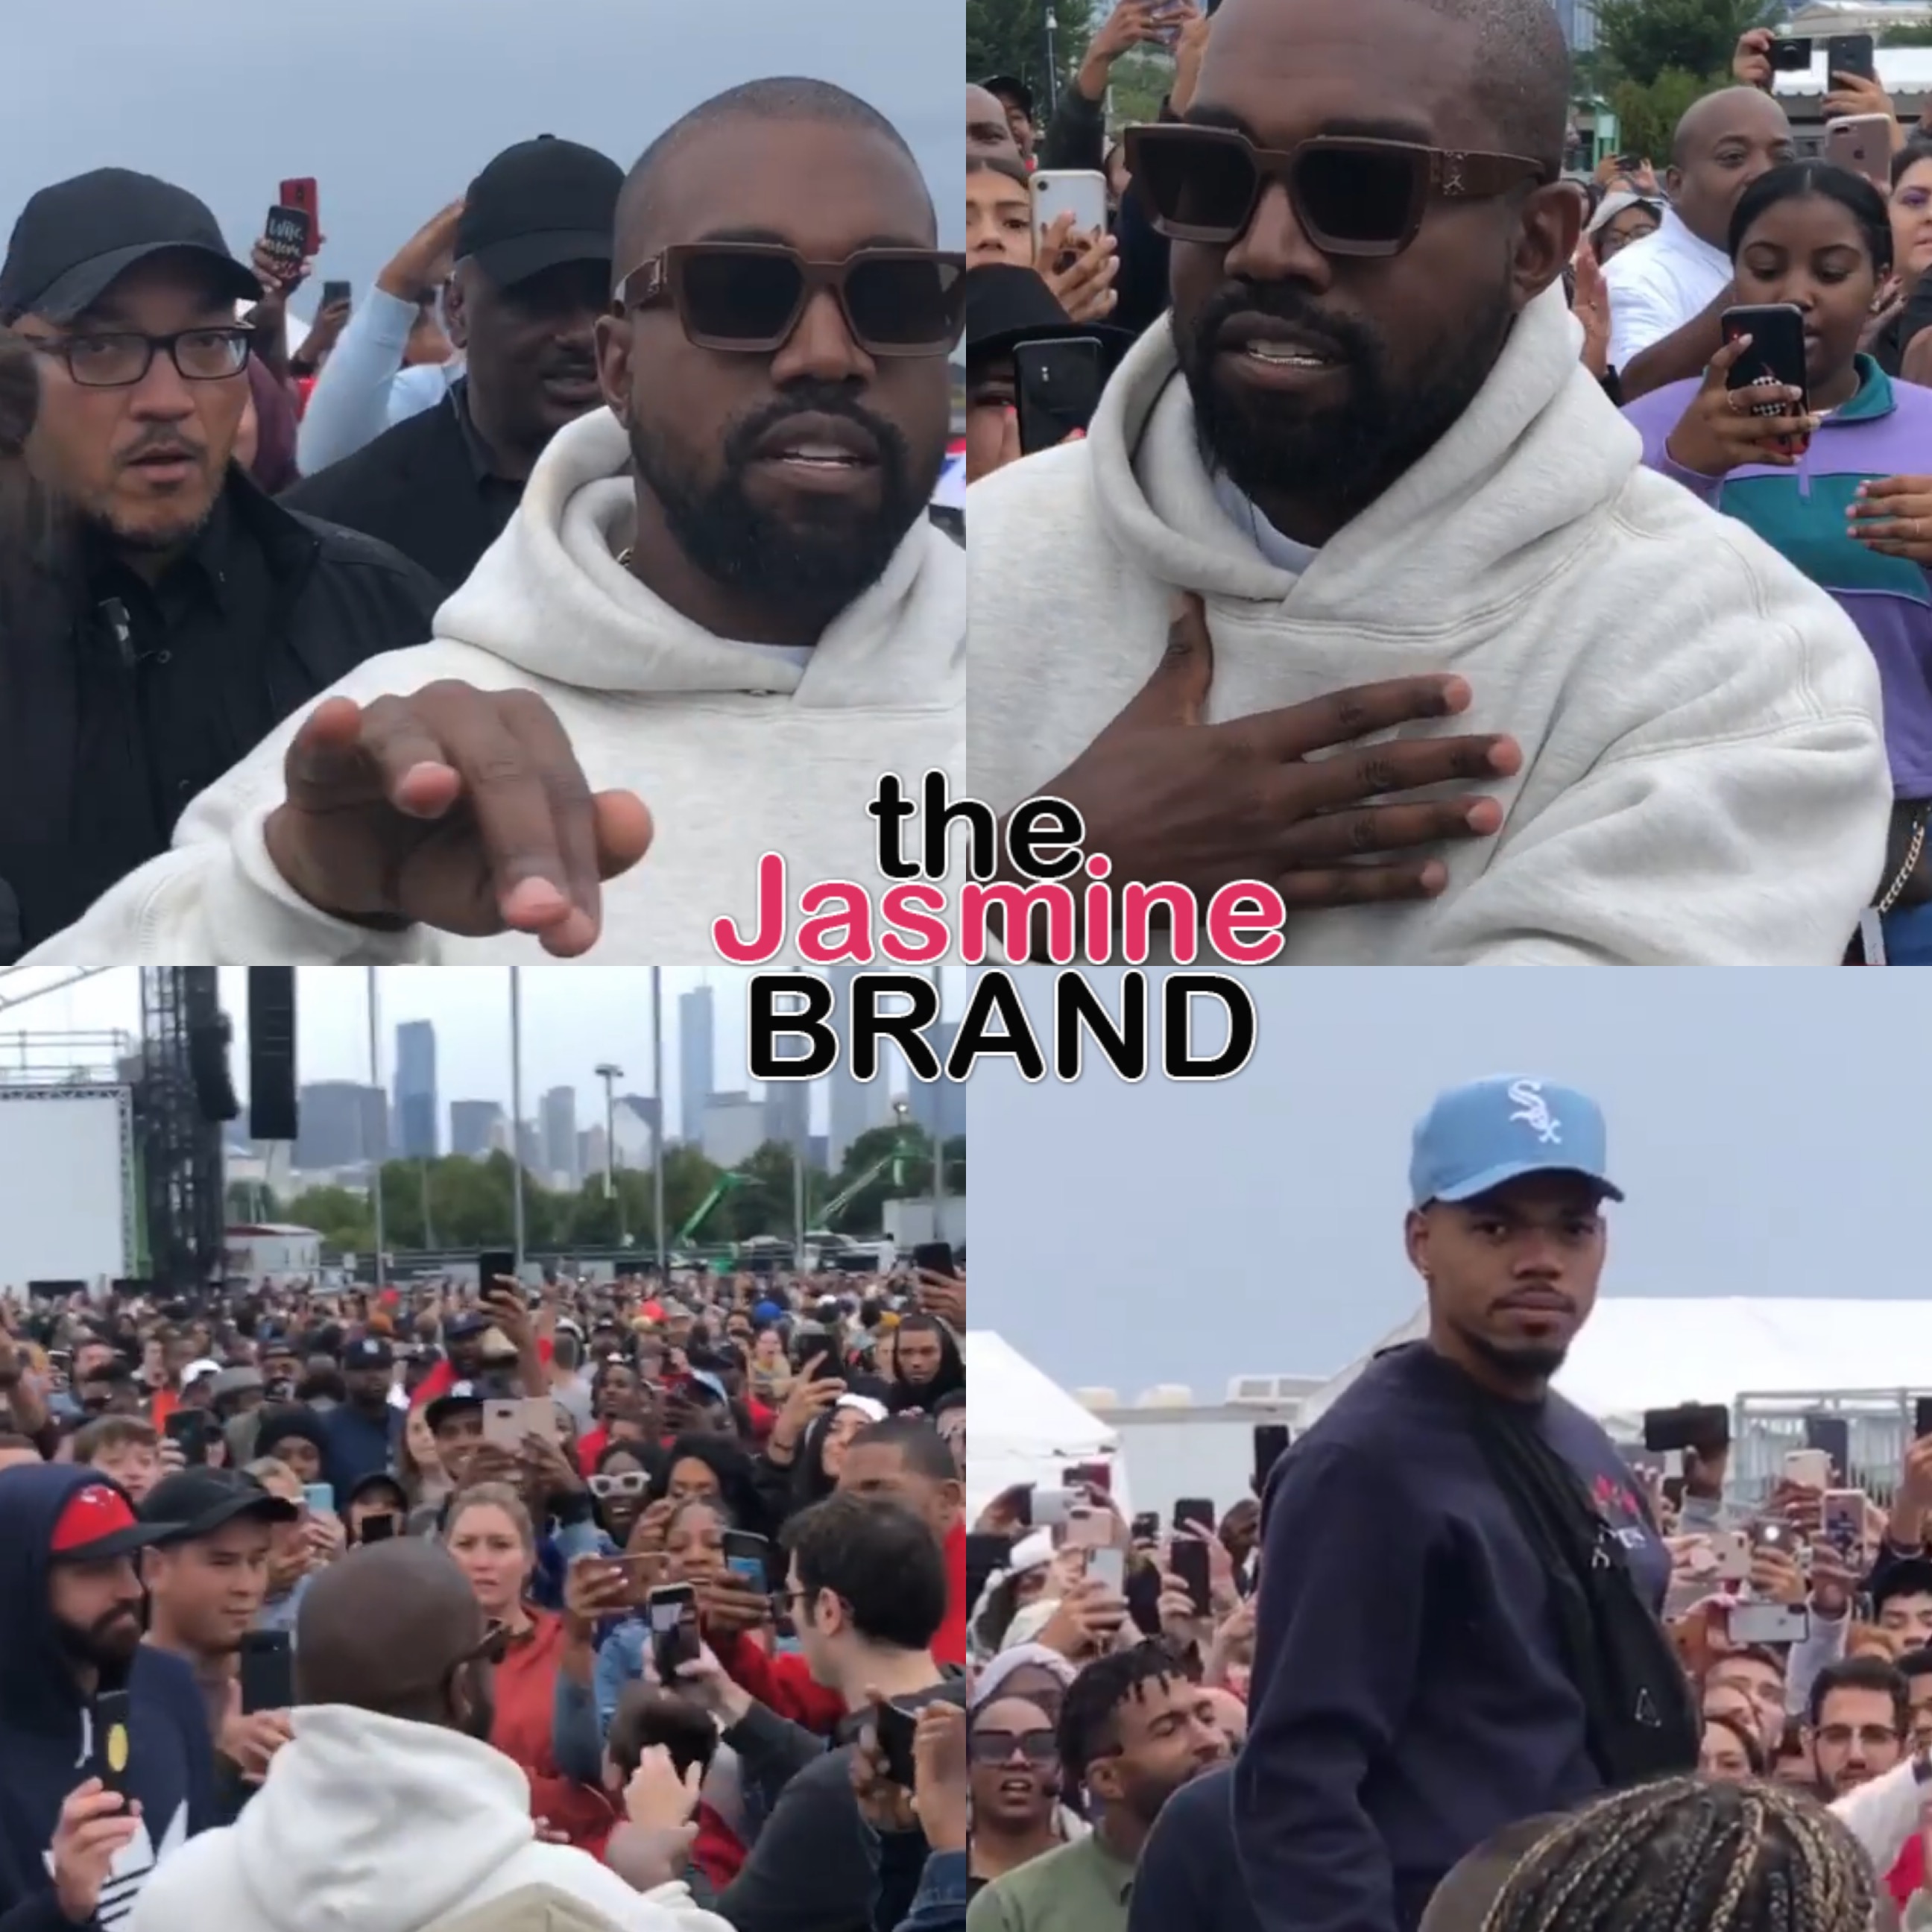 UpscaleHype - Kanye West Parts the Crowd for a 'Sunday Service